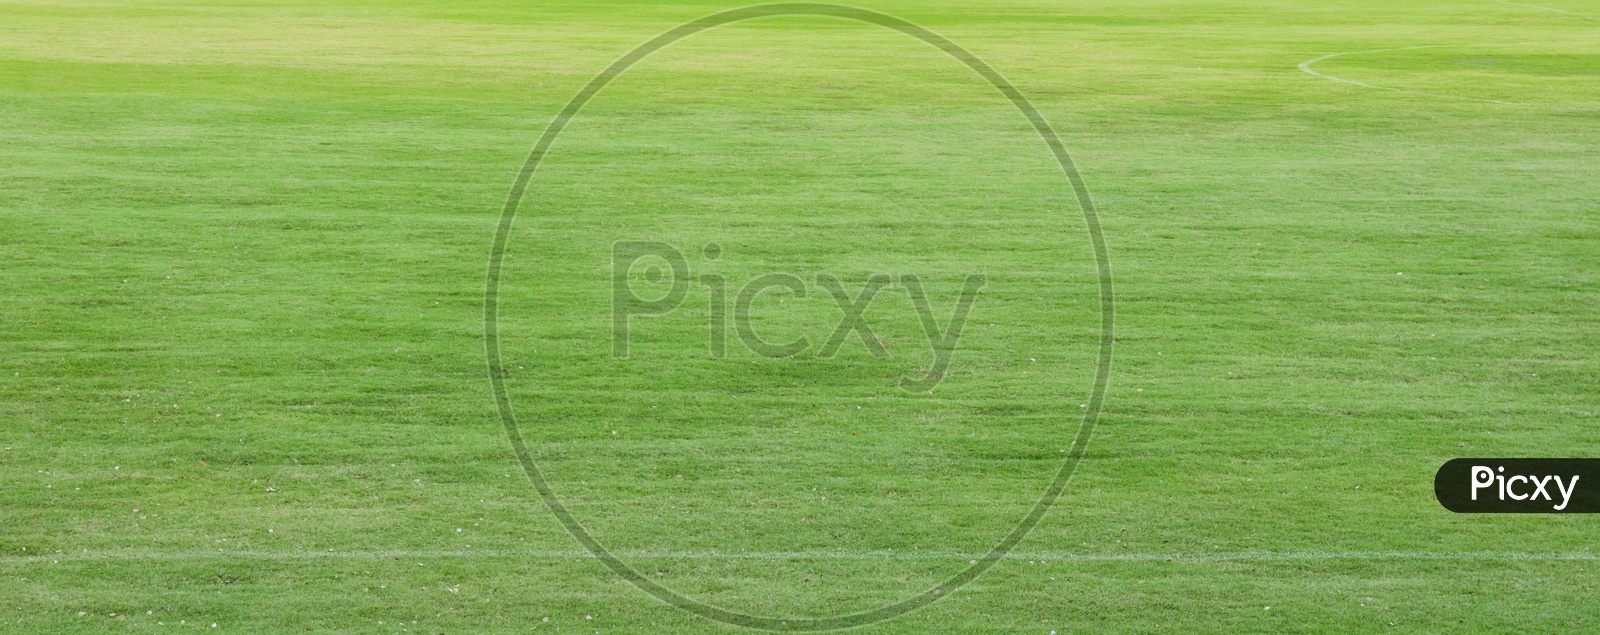 Green sports field with artificial grass